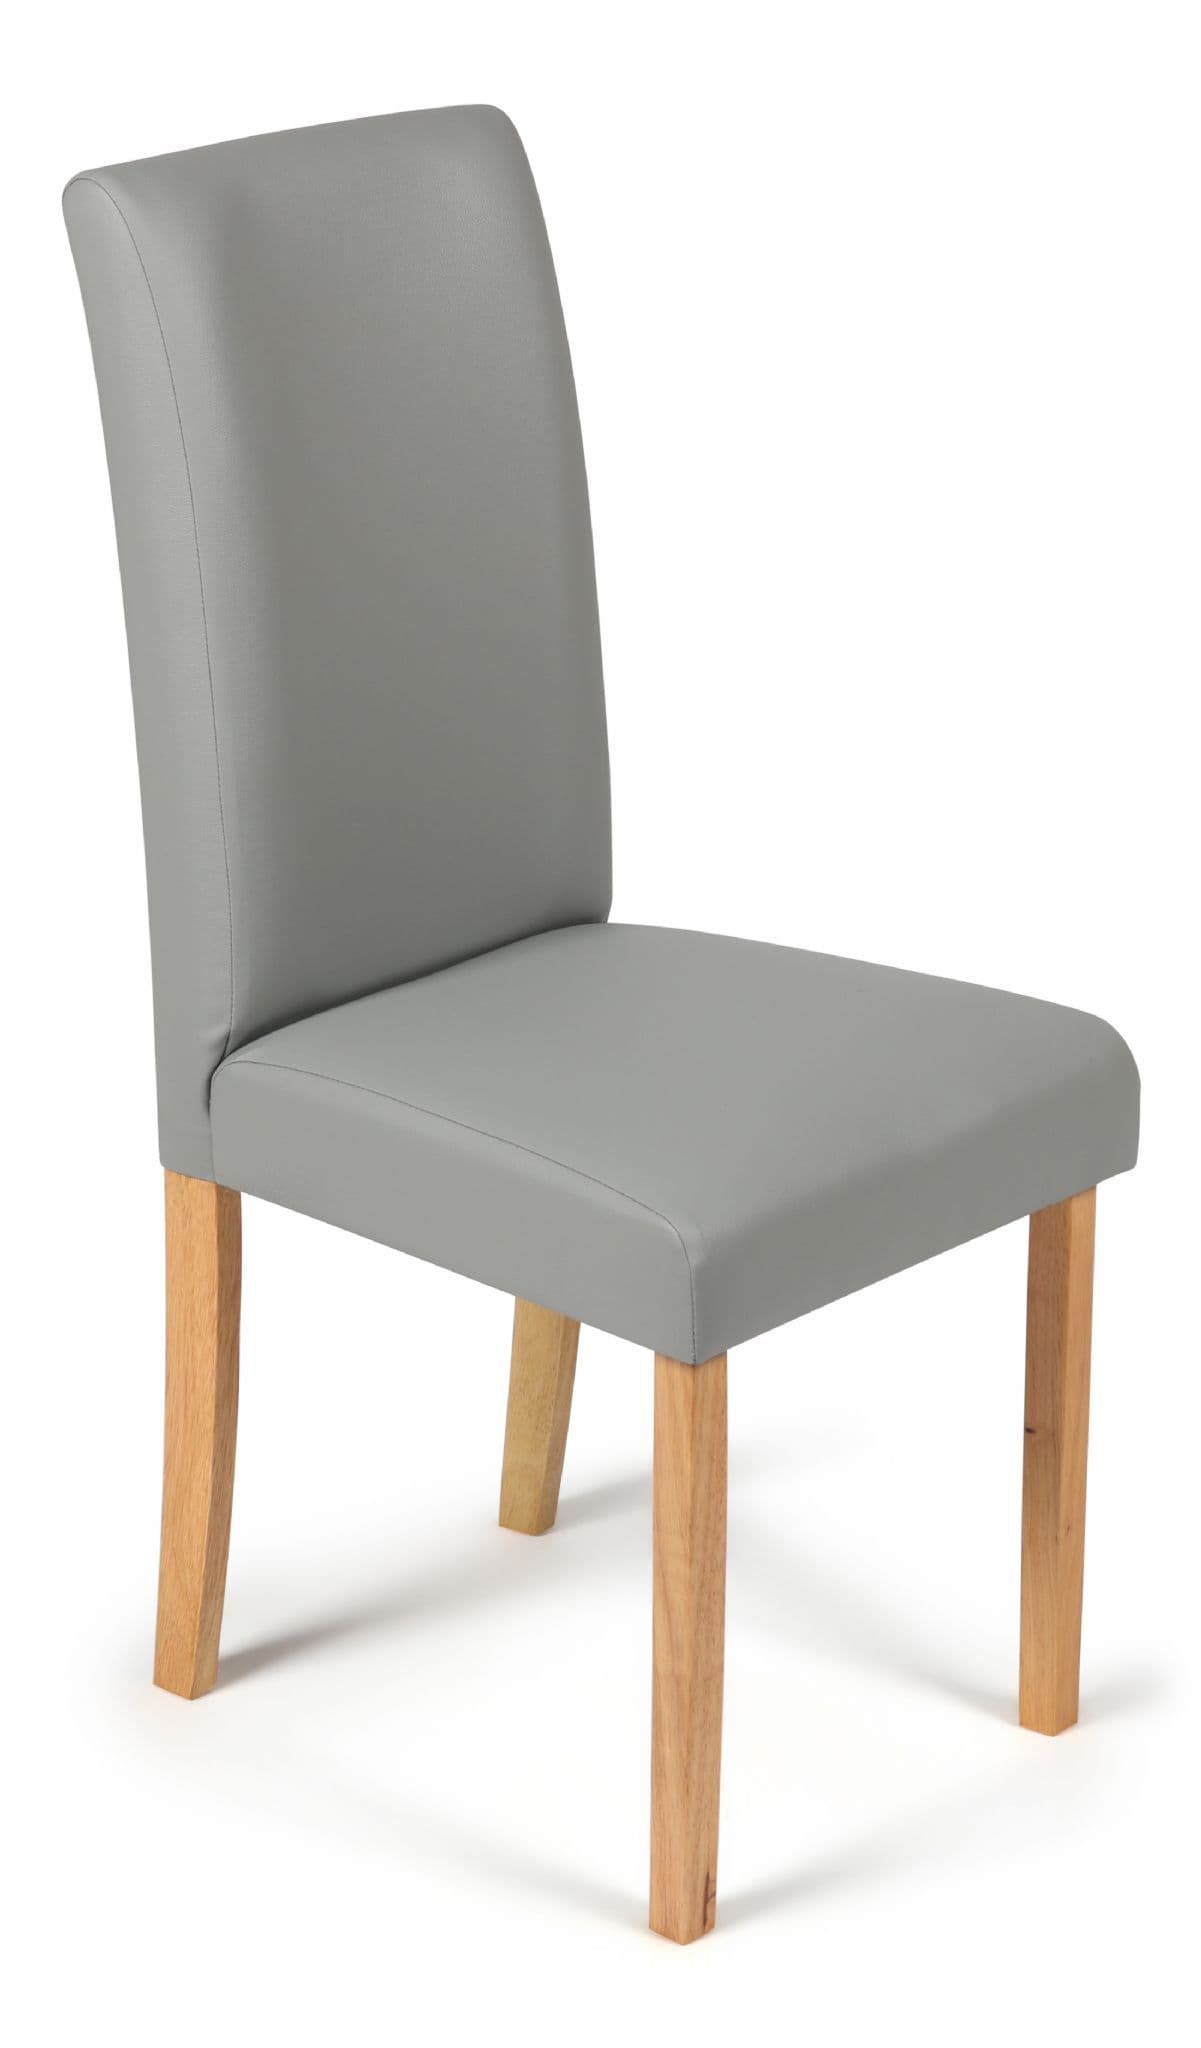 Matt Grey Torino Faux Leather Dining Chairs Front View